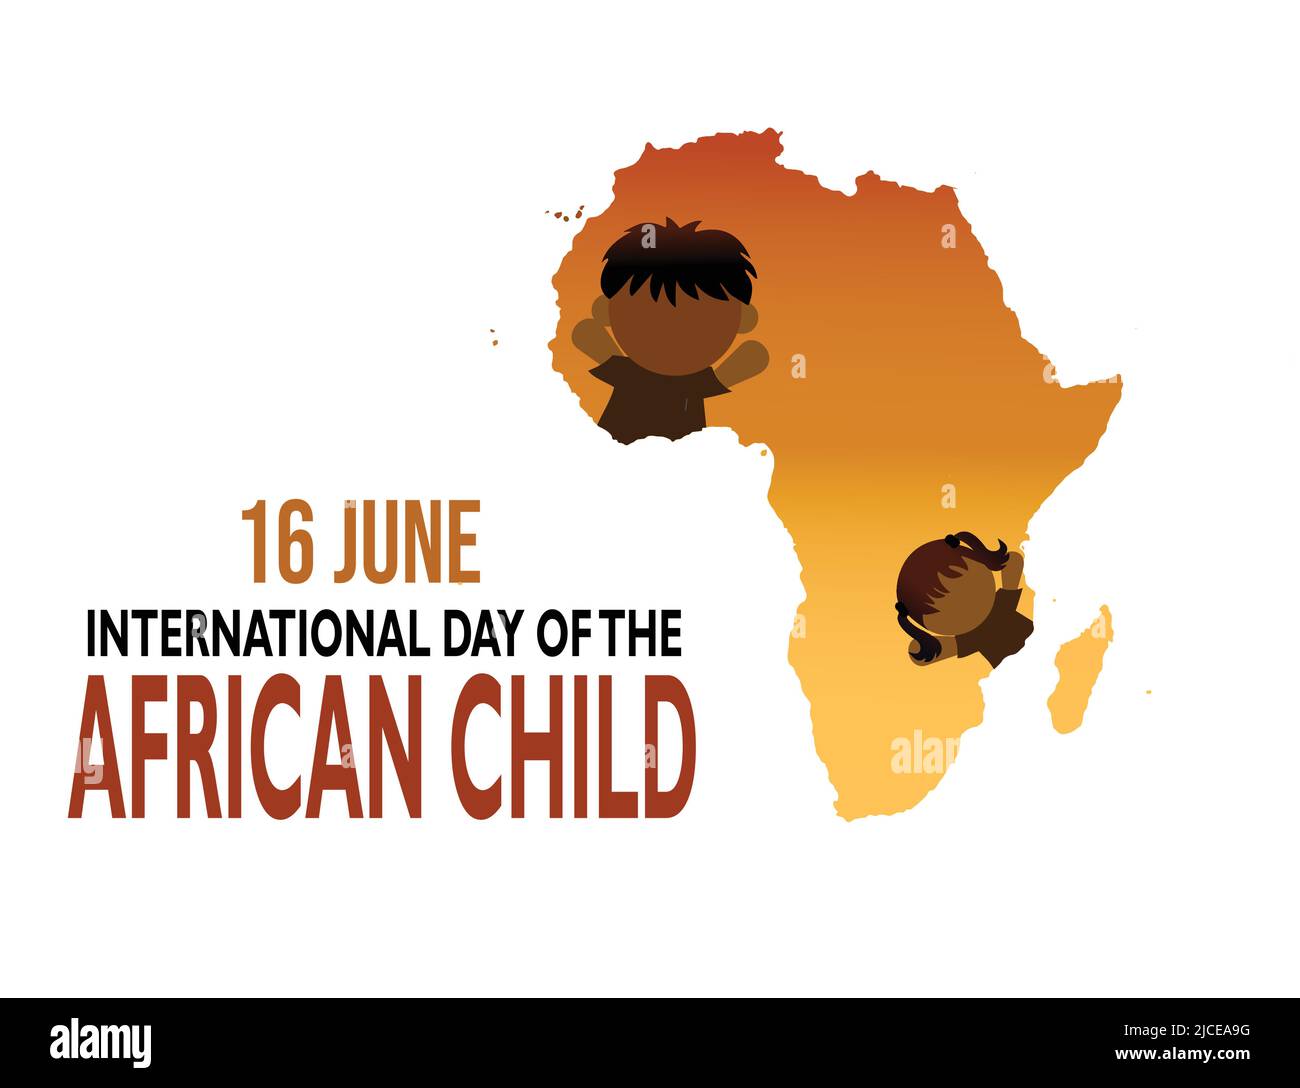 international day of the African child poster, girl and boy in Africa map Stock Vector